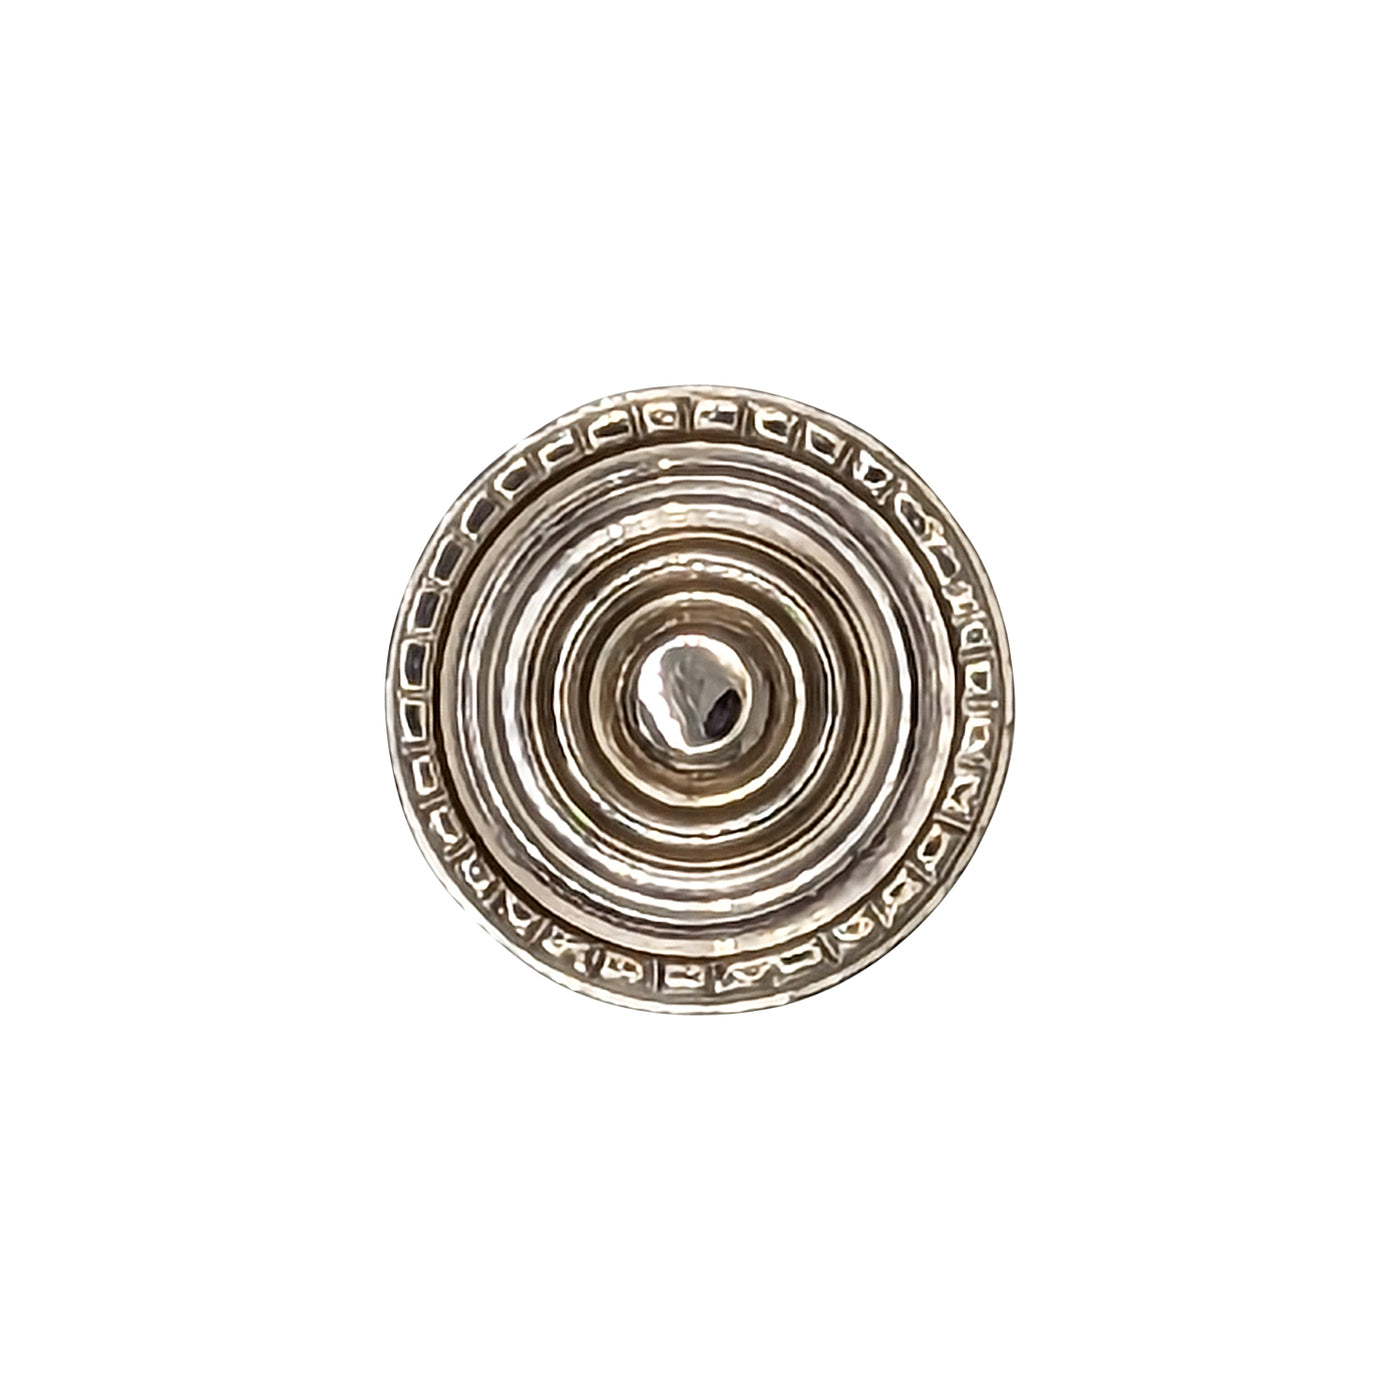 1 1/8 Inch Solid Brass Art Deco Beaded Circle Cabinet & Furniture Knob